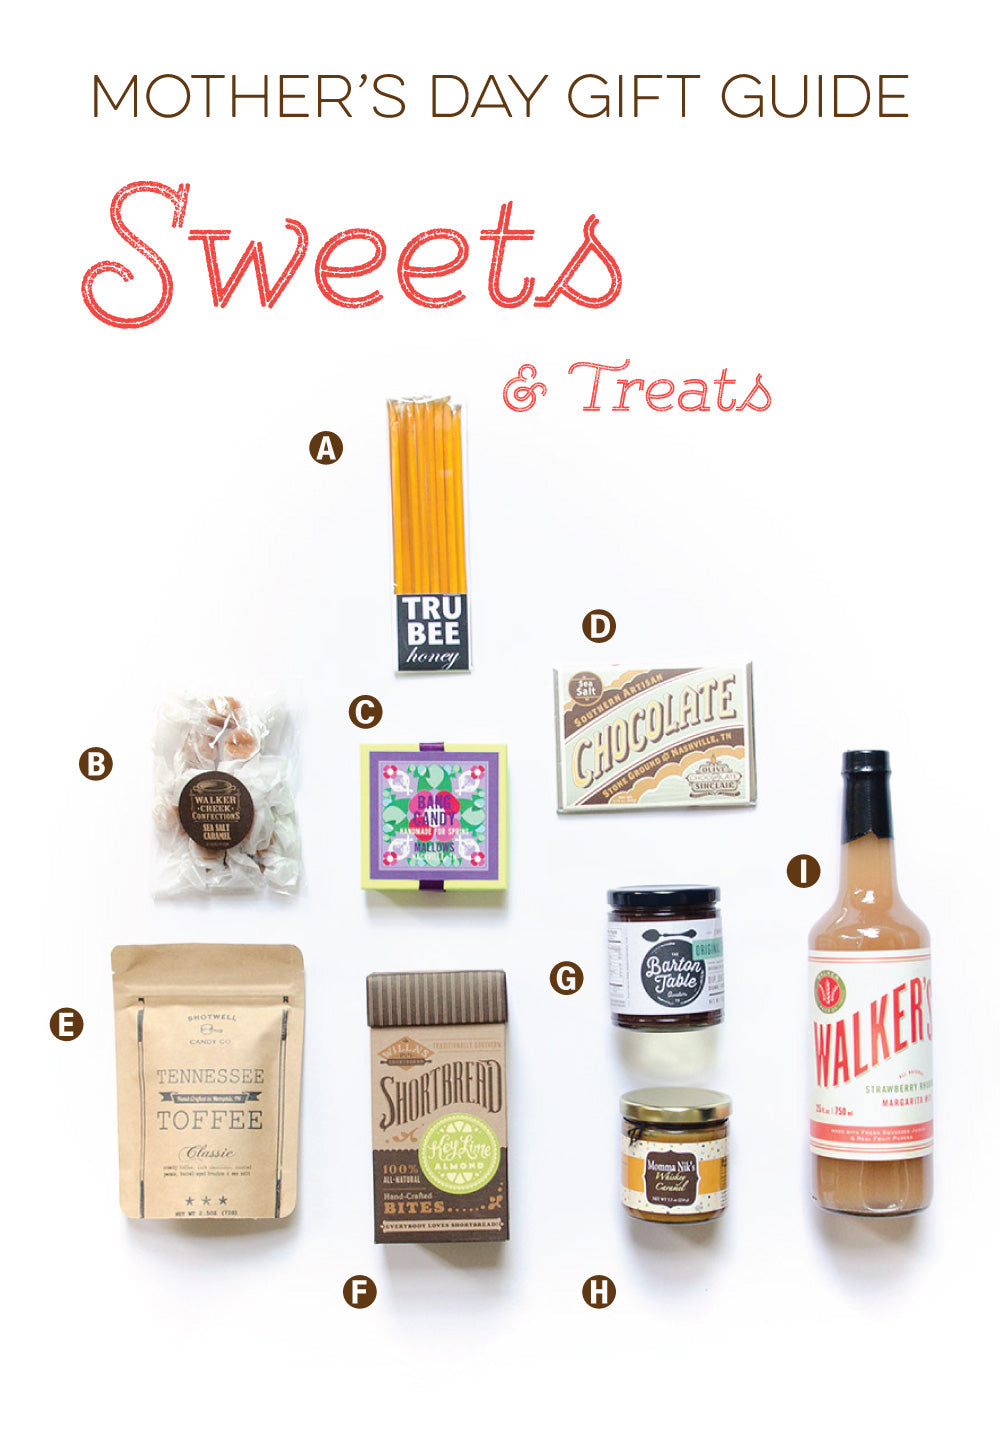 Mother's Day Gift Guide - Sweets and Treats